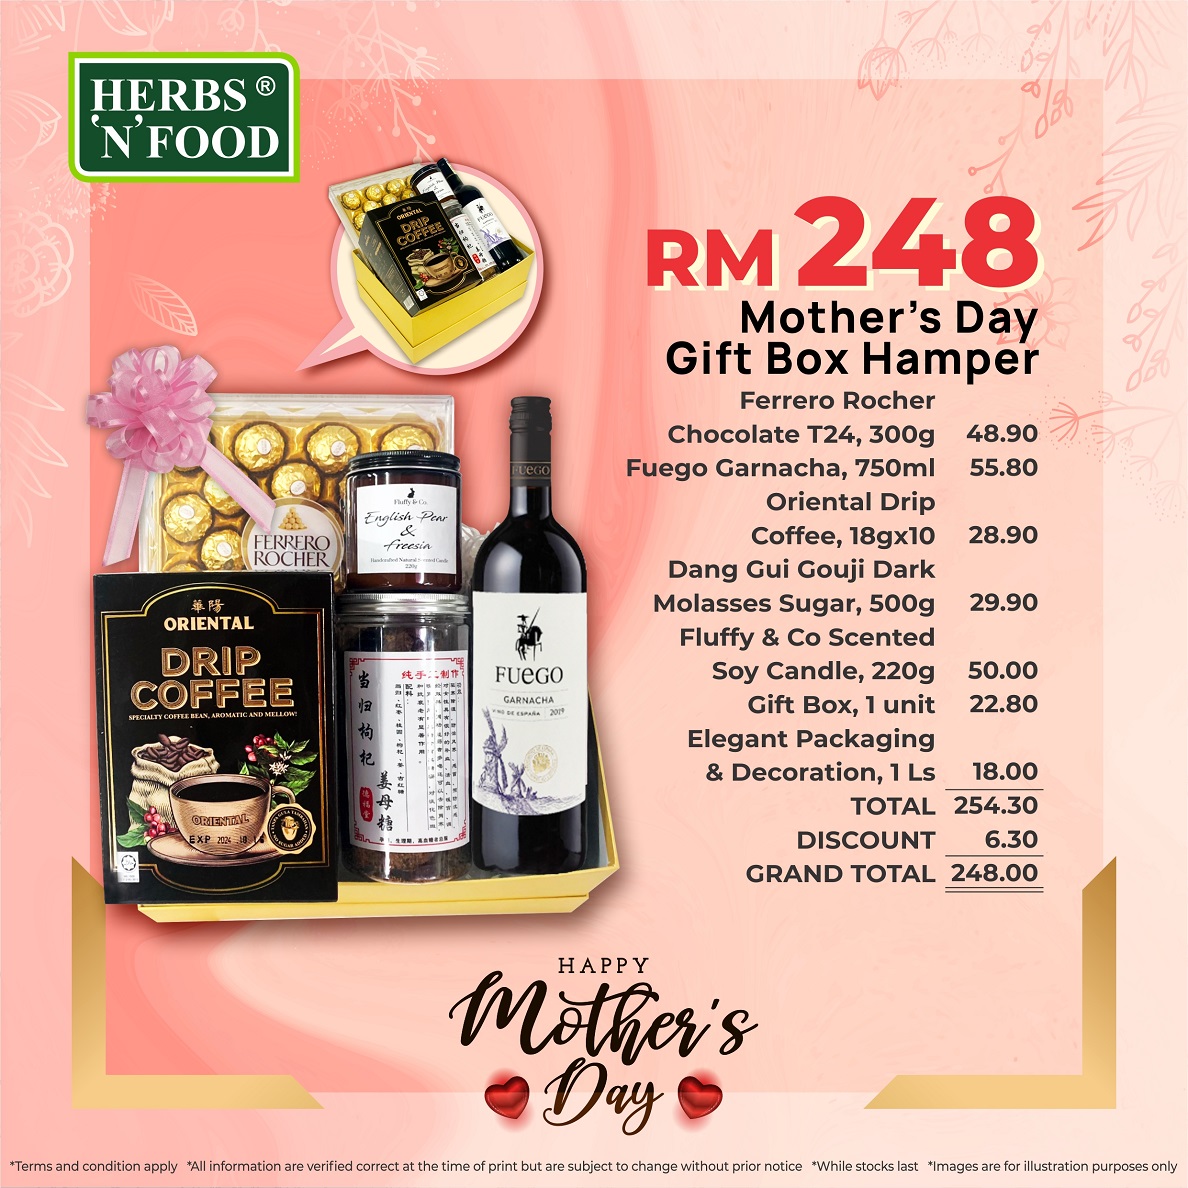 MOTHER’S DAY GIFT BOX HAMPER RM248